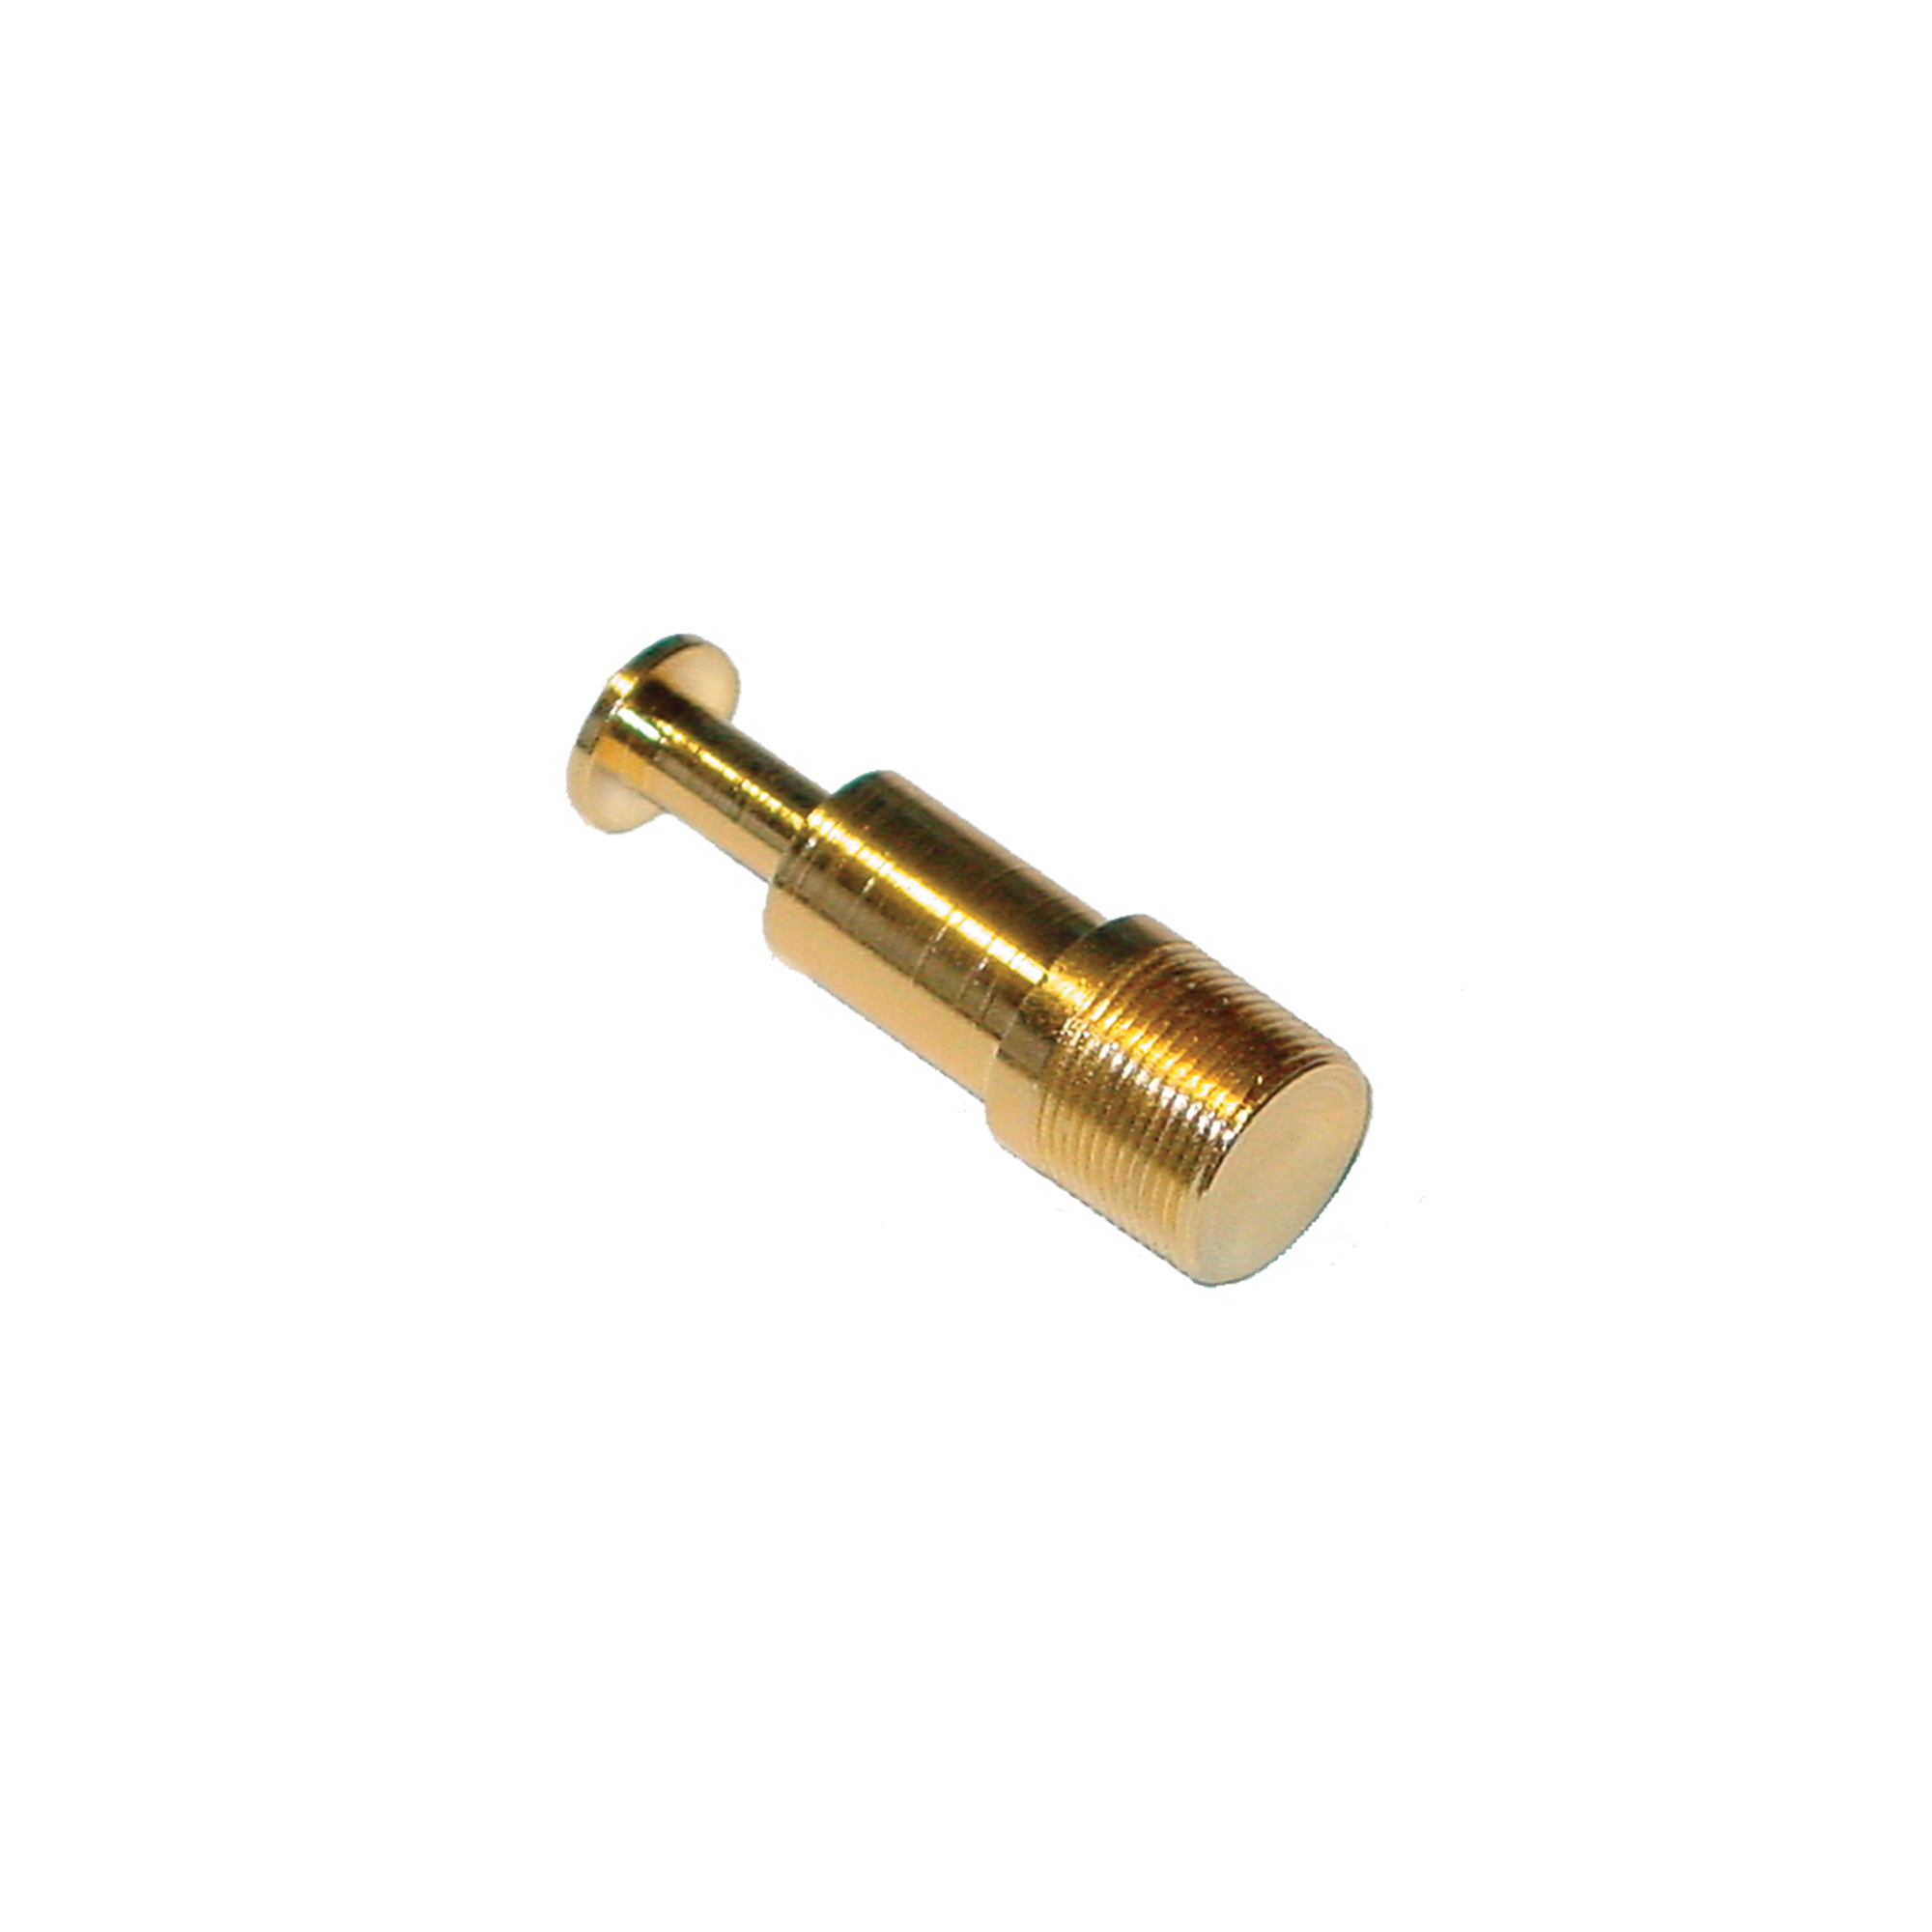 【16231】REPLACEMENT 5/87-27 MIC STUD FOR